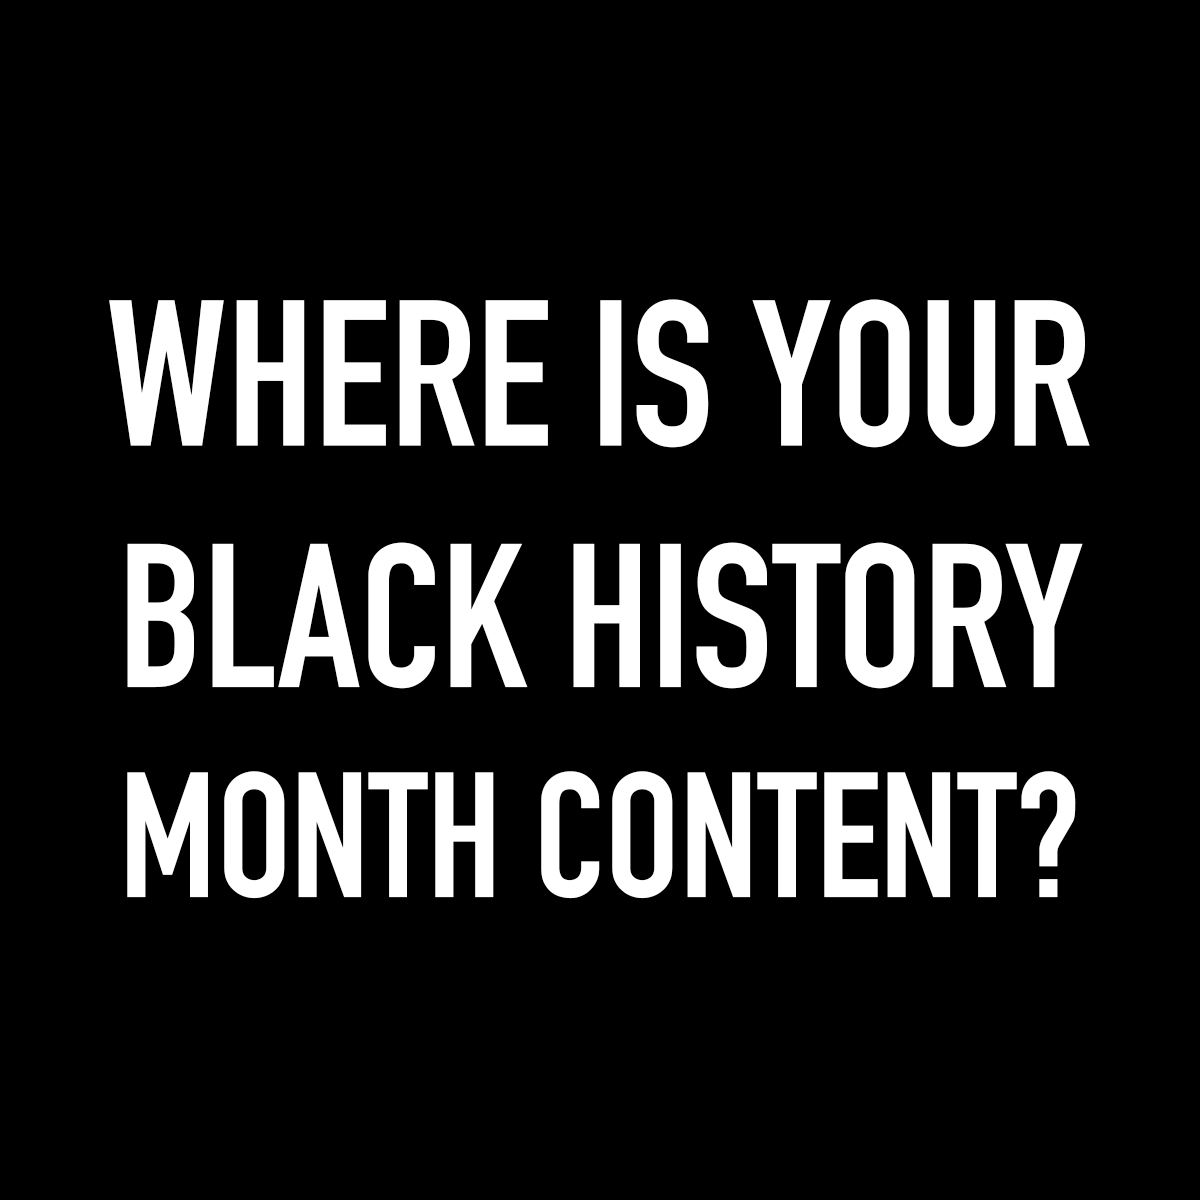 Where is your Black History Month Content?